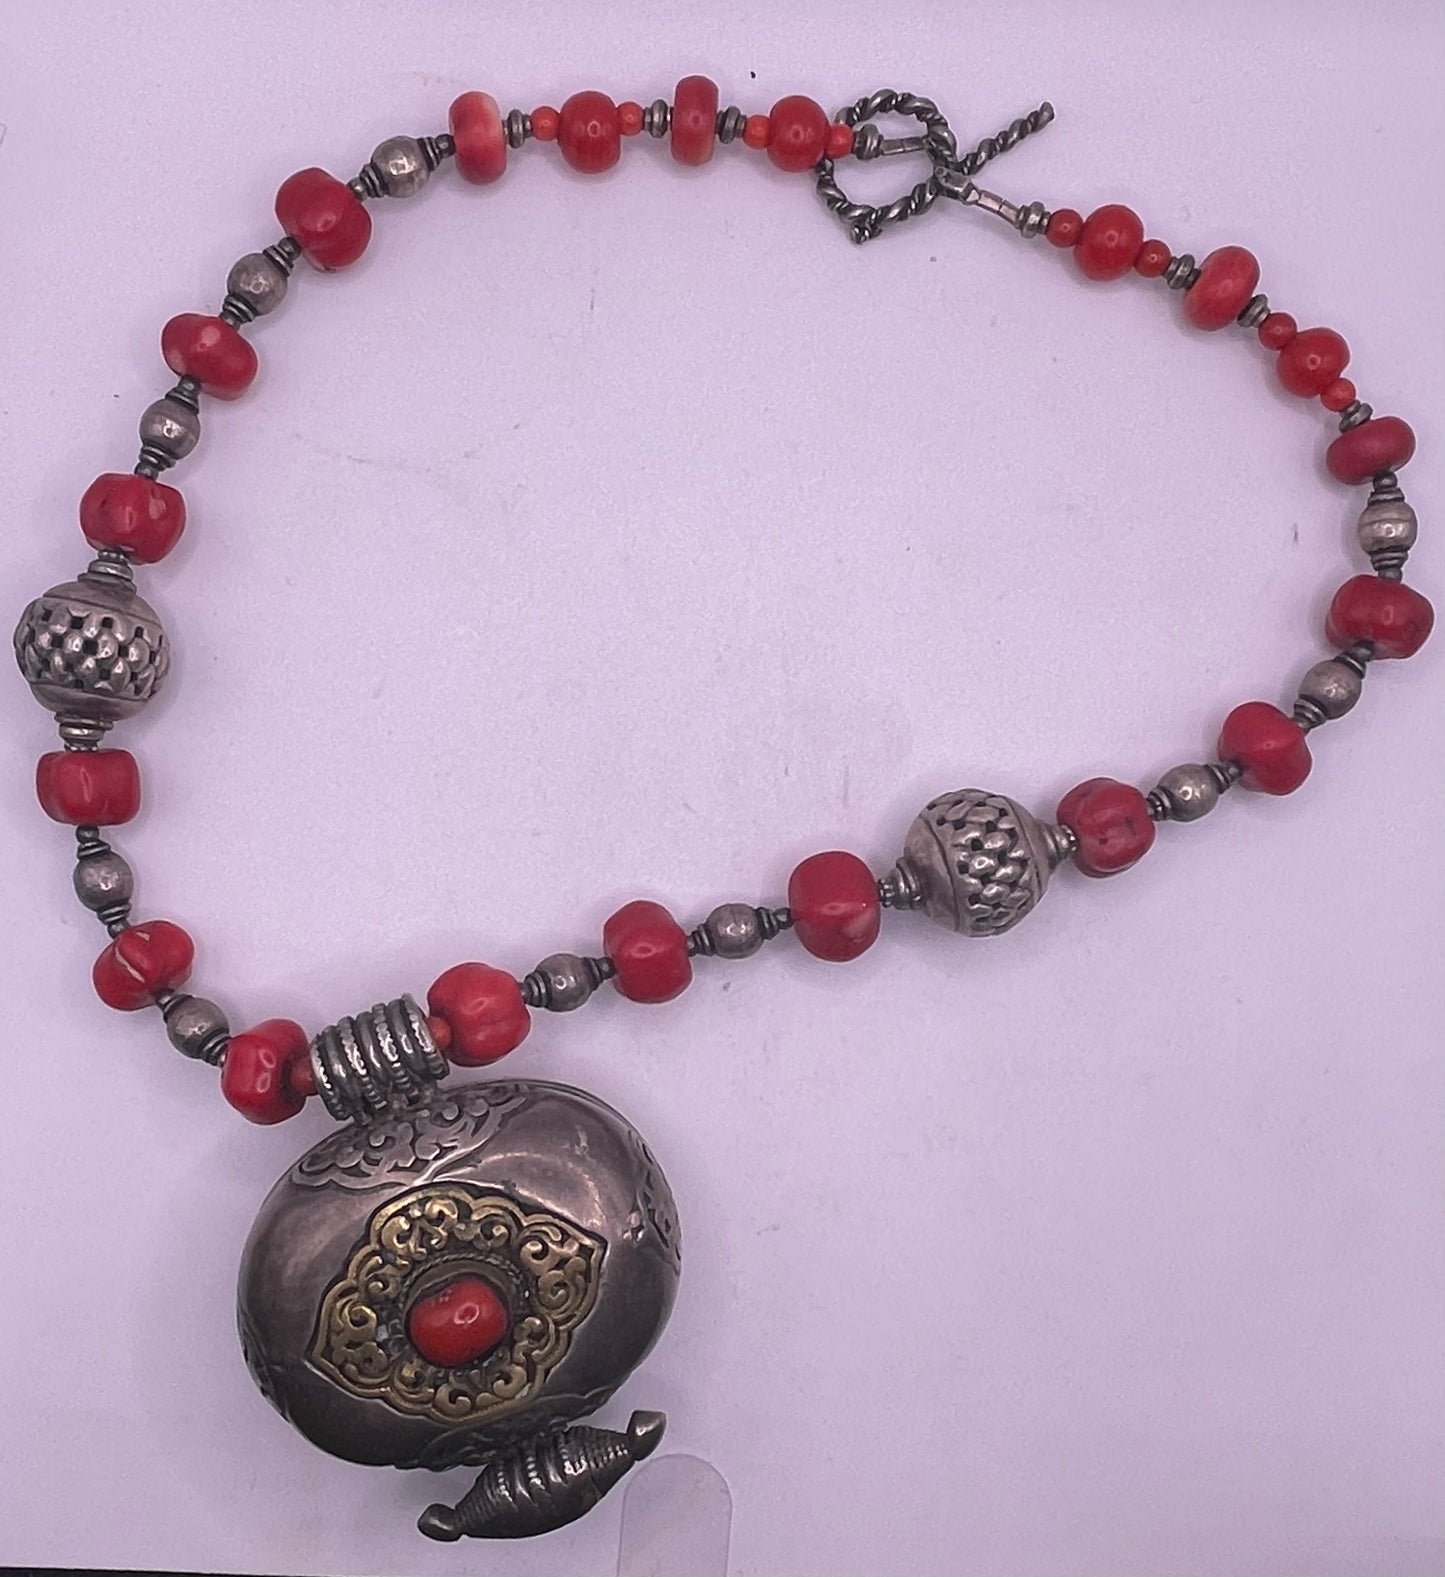 Antique Tibetan coral ghau pendant with a coral and silver necklace